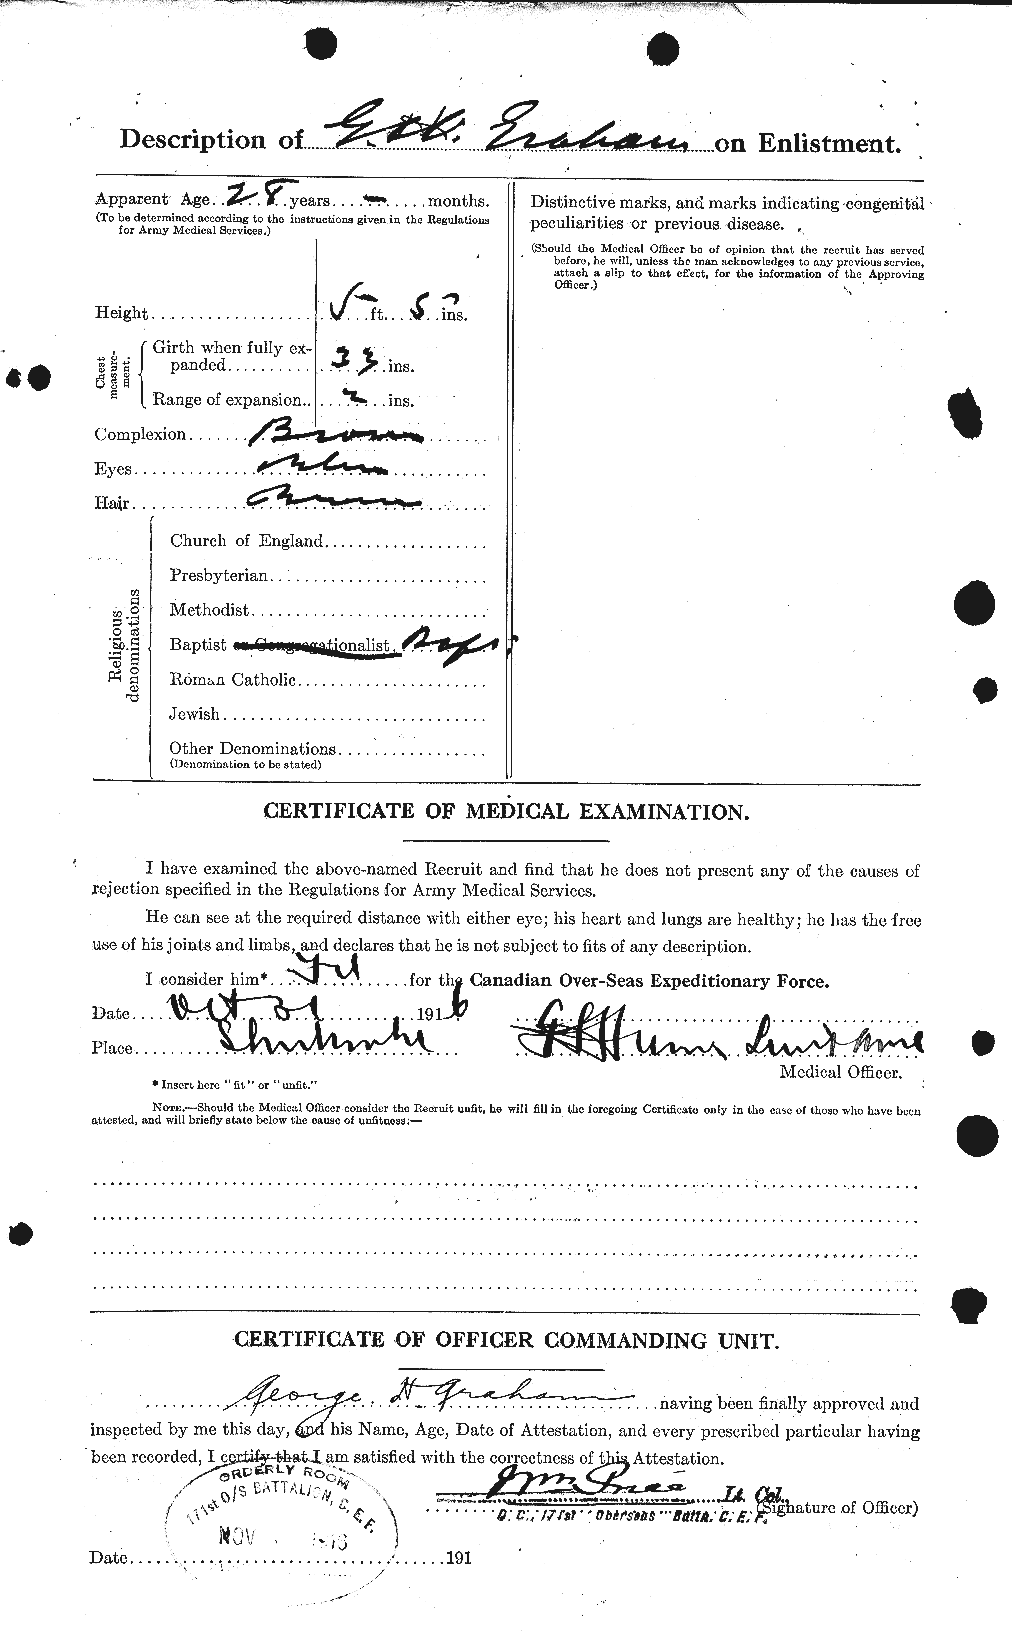 Personnel Records of the First World War - CEF 357665b